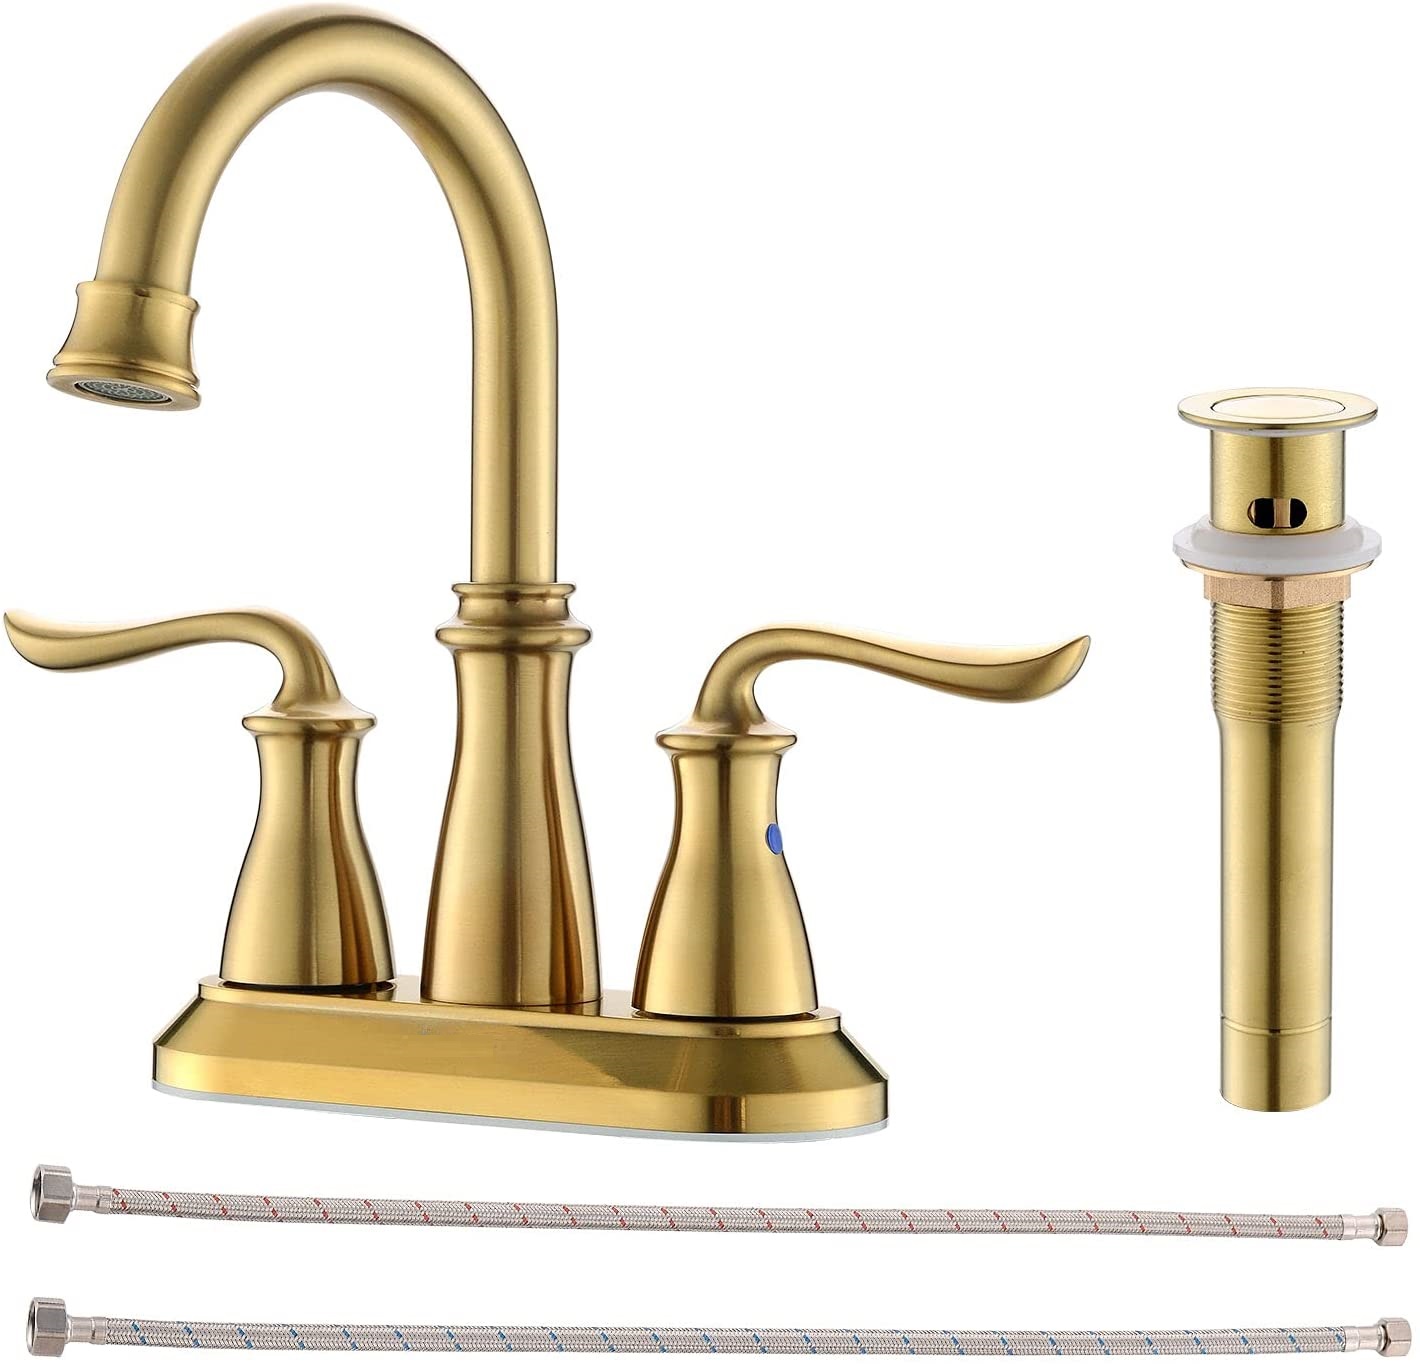 Luxury Gold Bathroom Wash 3 Hole Faucets Mixers Taps Faucet For Bathroom Sink Basin Water Faucet Mixer